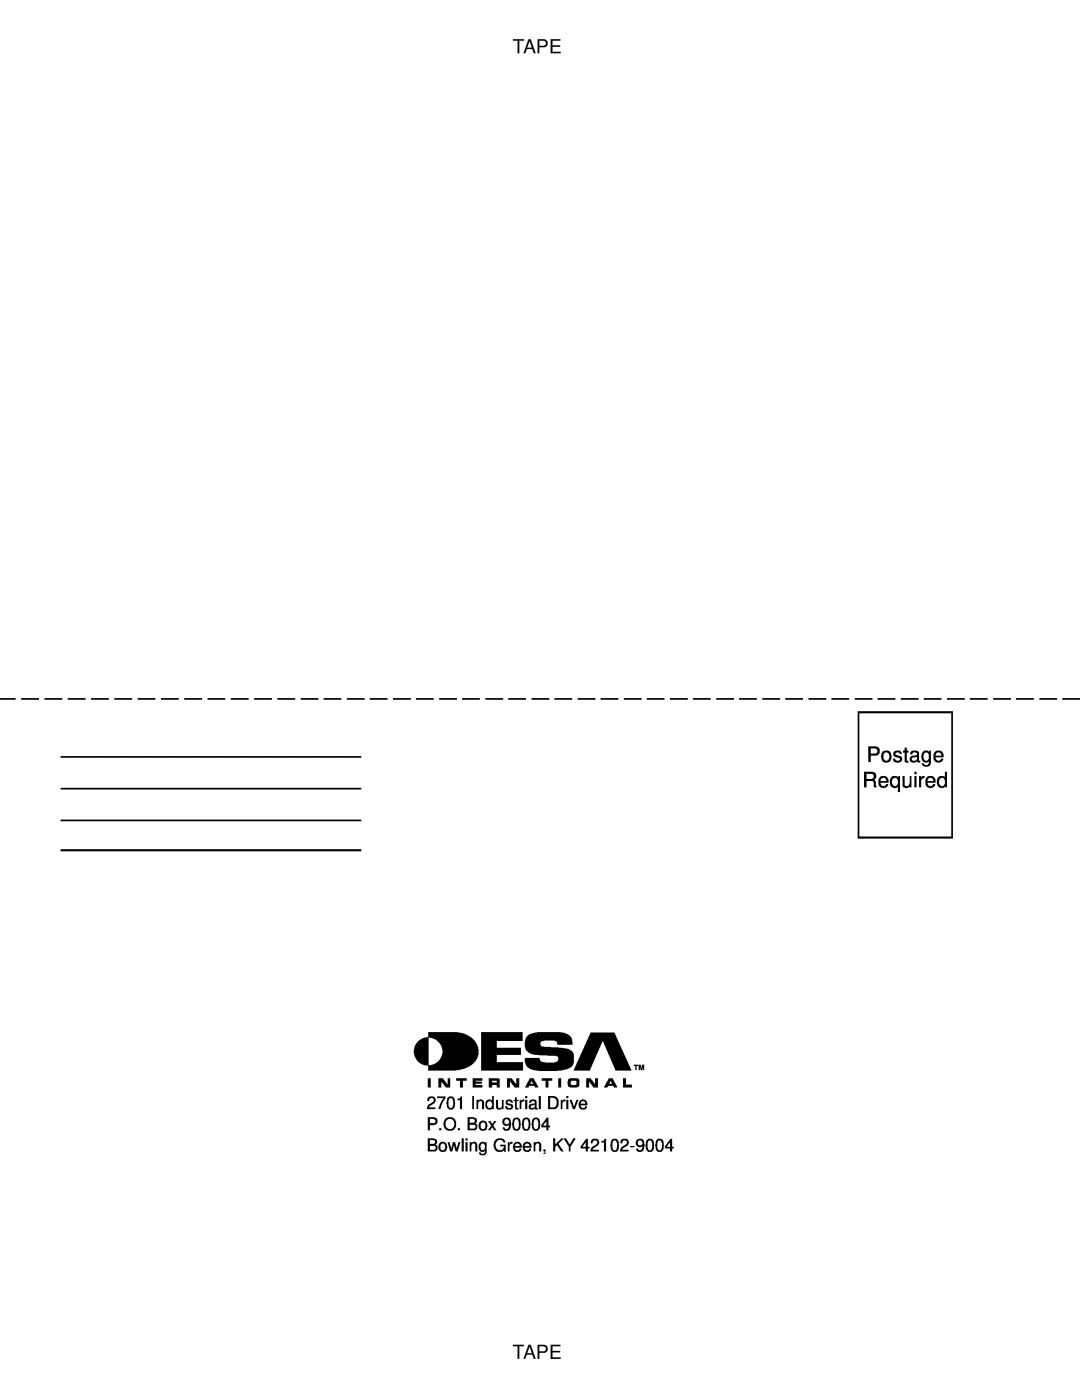 Desa BNG150T owner manual Postage Required, Tape, Industrial Drive P.O. Box Bowling Green, KY 